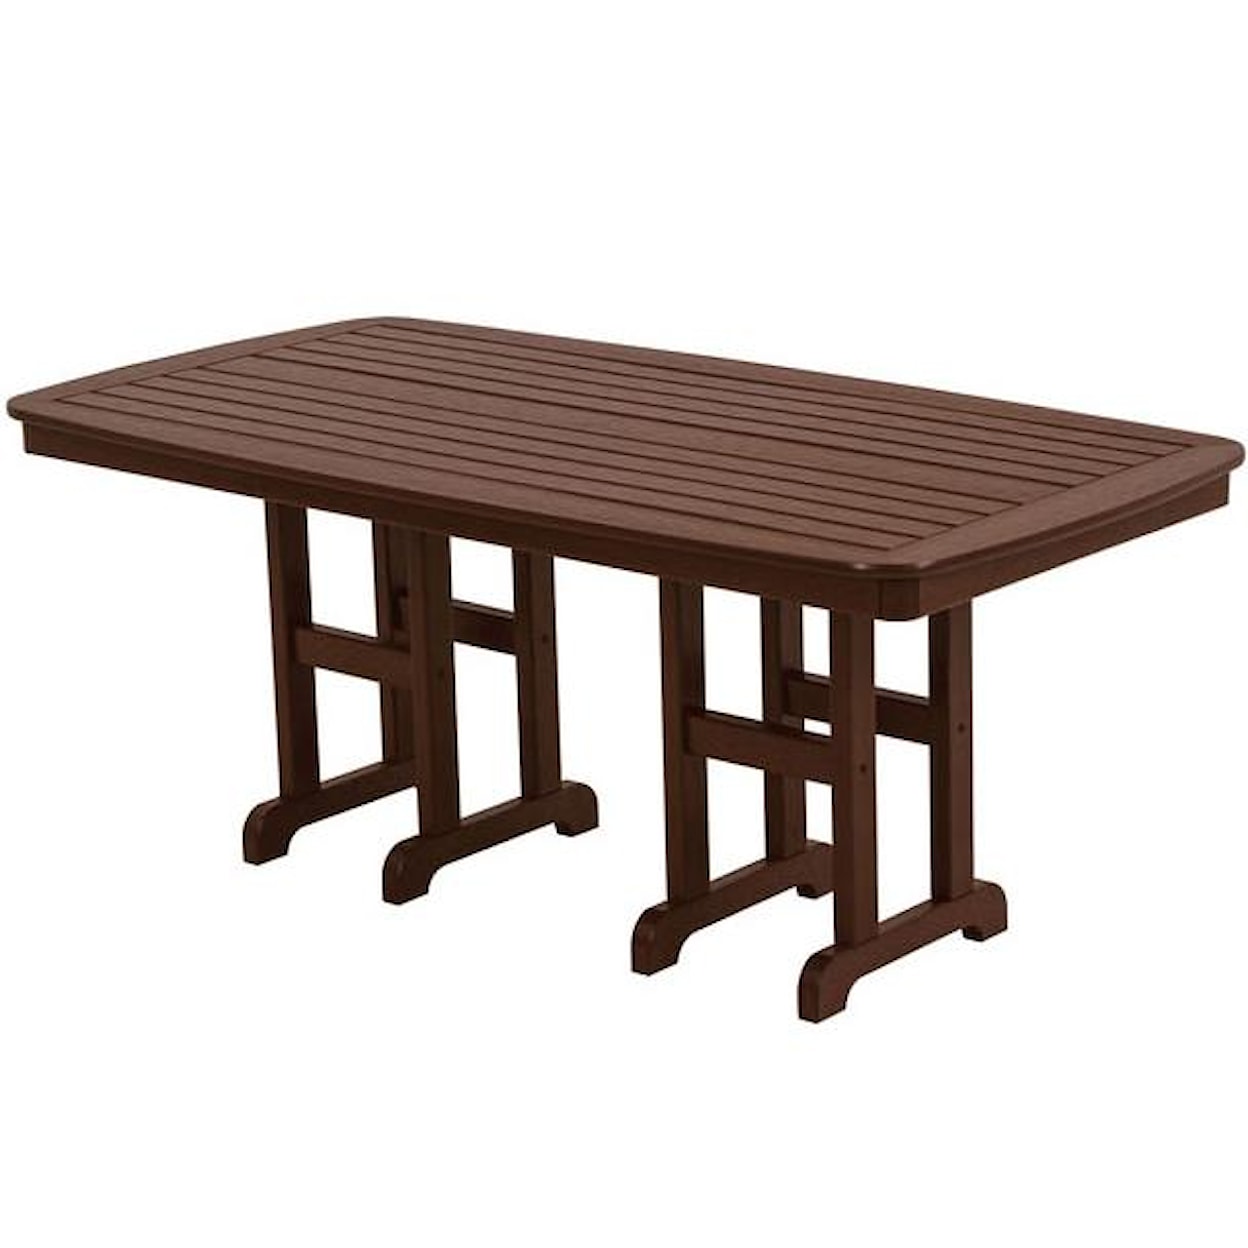 Polywood Nautical Outdoor Dining Table